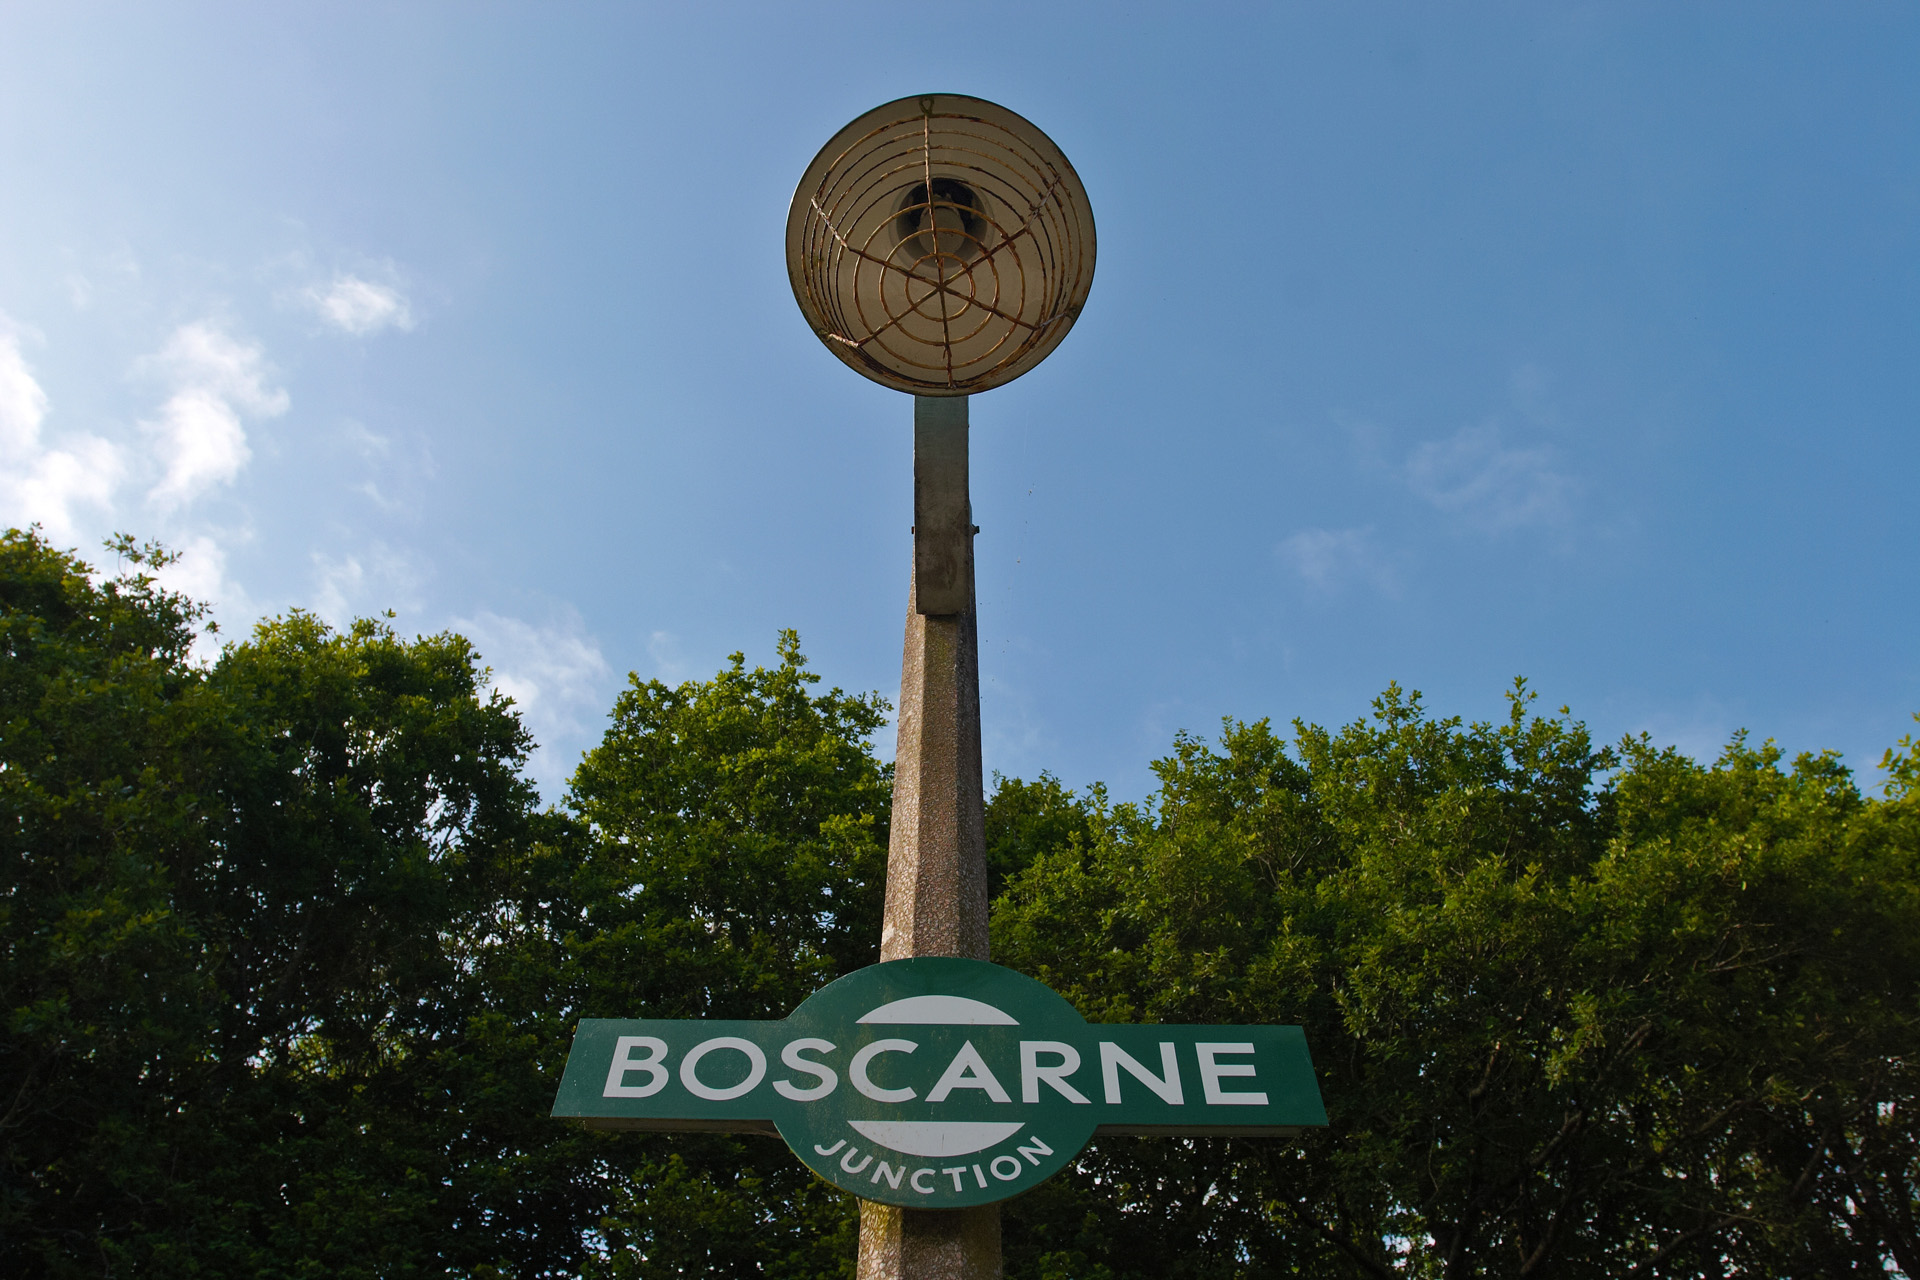 Boscarne Junction railway station sign and lamp